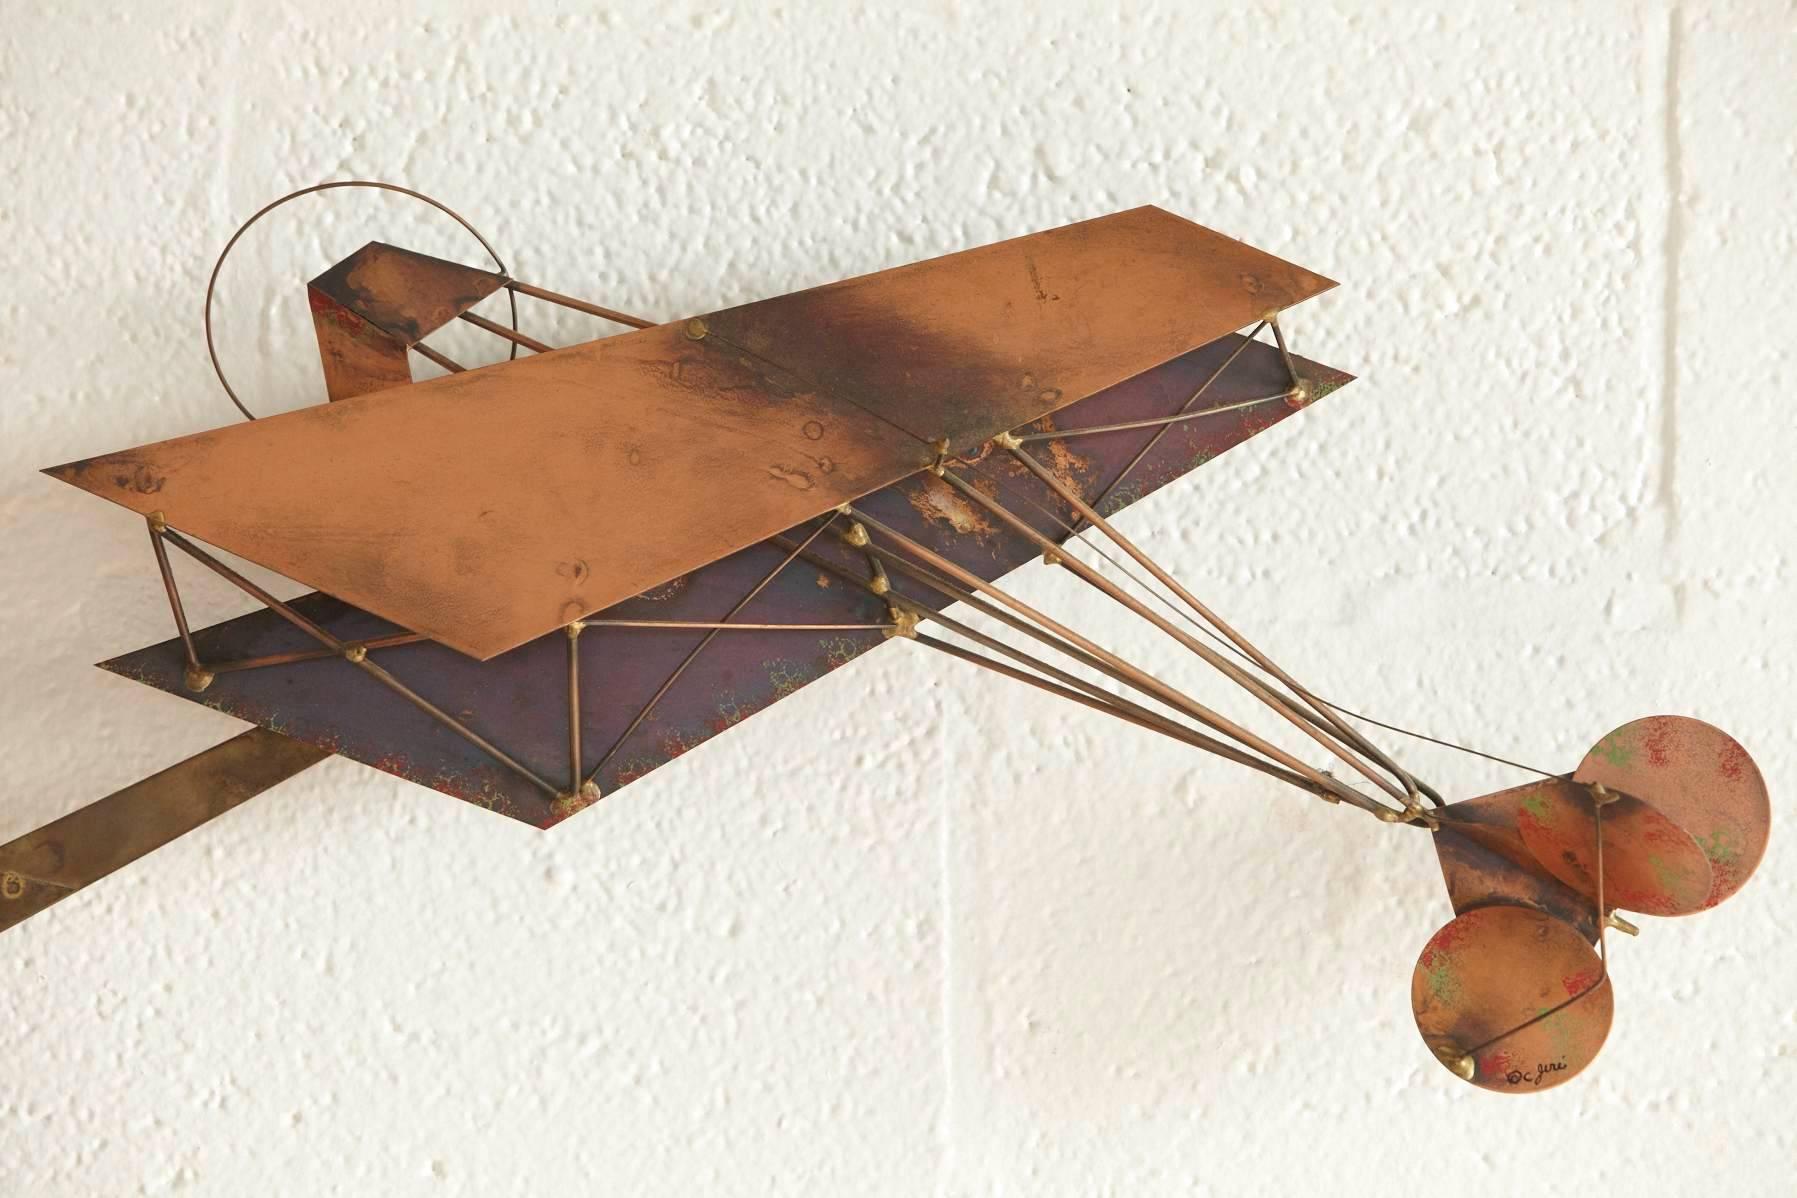 Very rare brass wall sculpture showing in detail airplanes and an airfield with building and landing strip. Impressive three-dimensional view.
Original piece in very good vintage condition with age appropriate patina.
Signed by Curtis Jere, circa